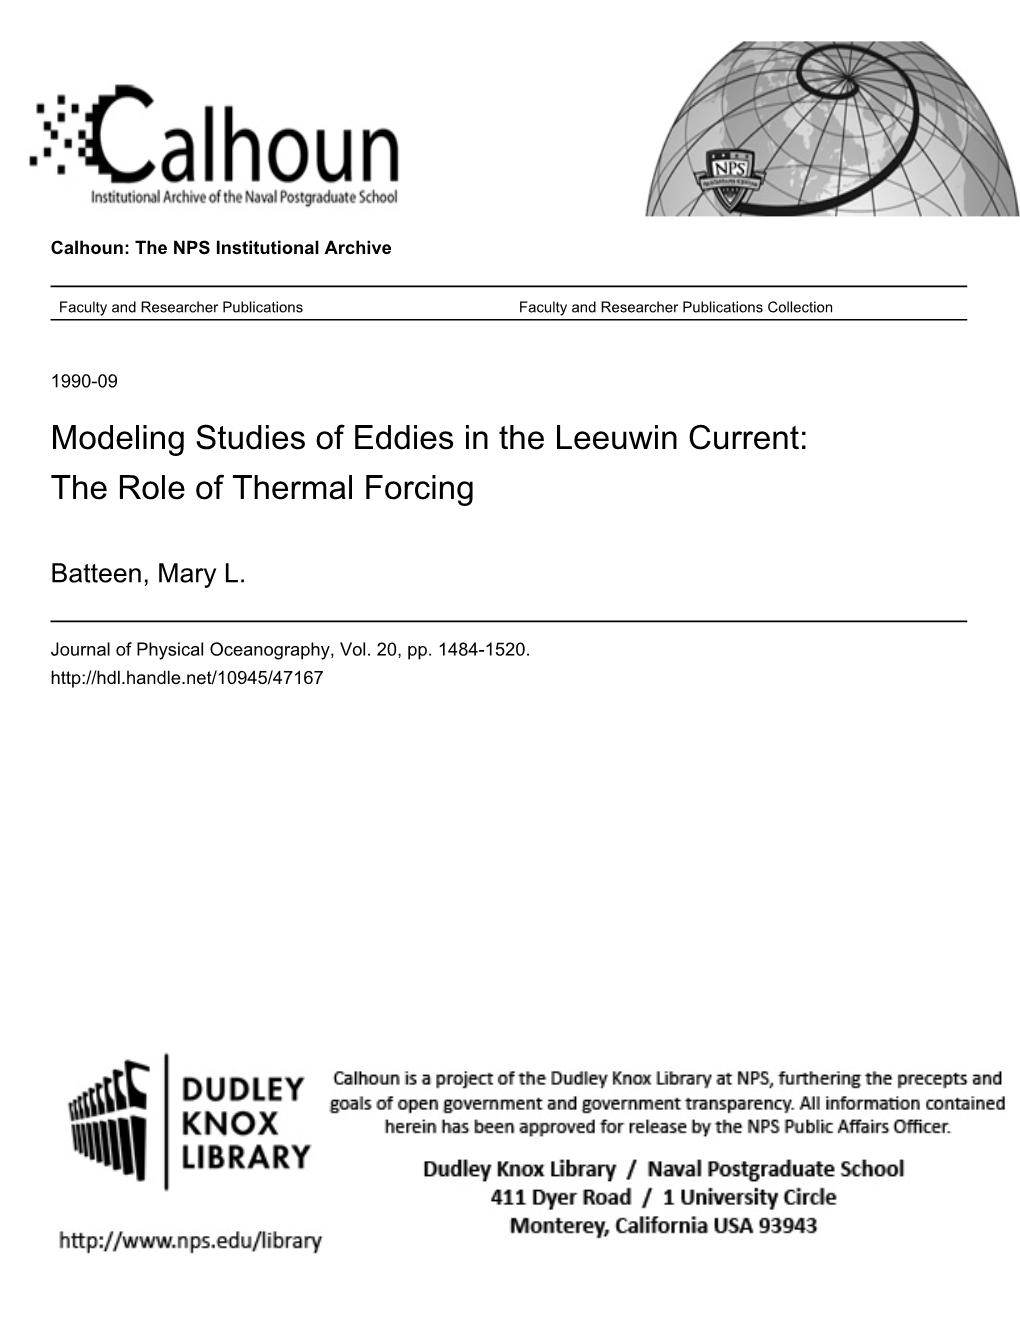 Modeling Studies of Eddies in the Leeuwin Current: the Role of Thermal Forcing